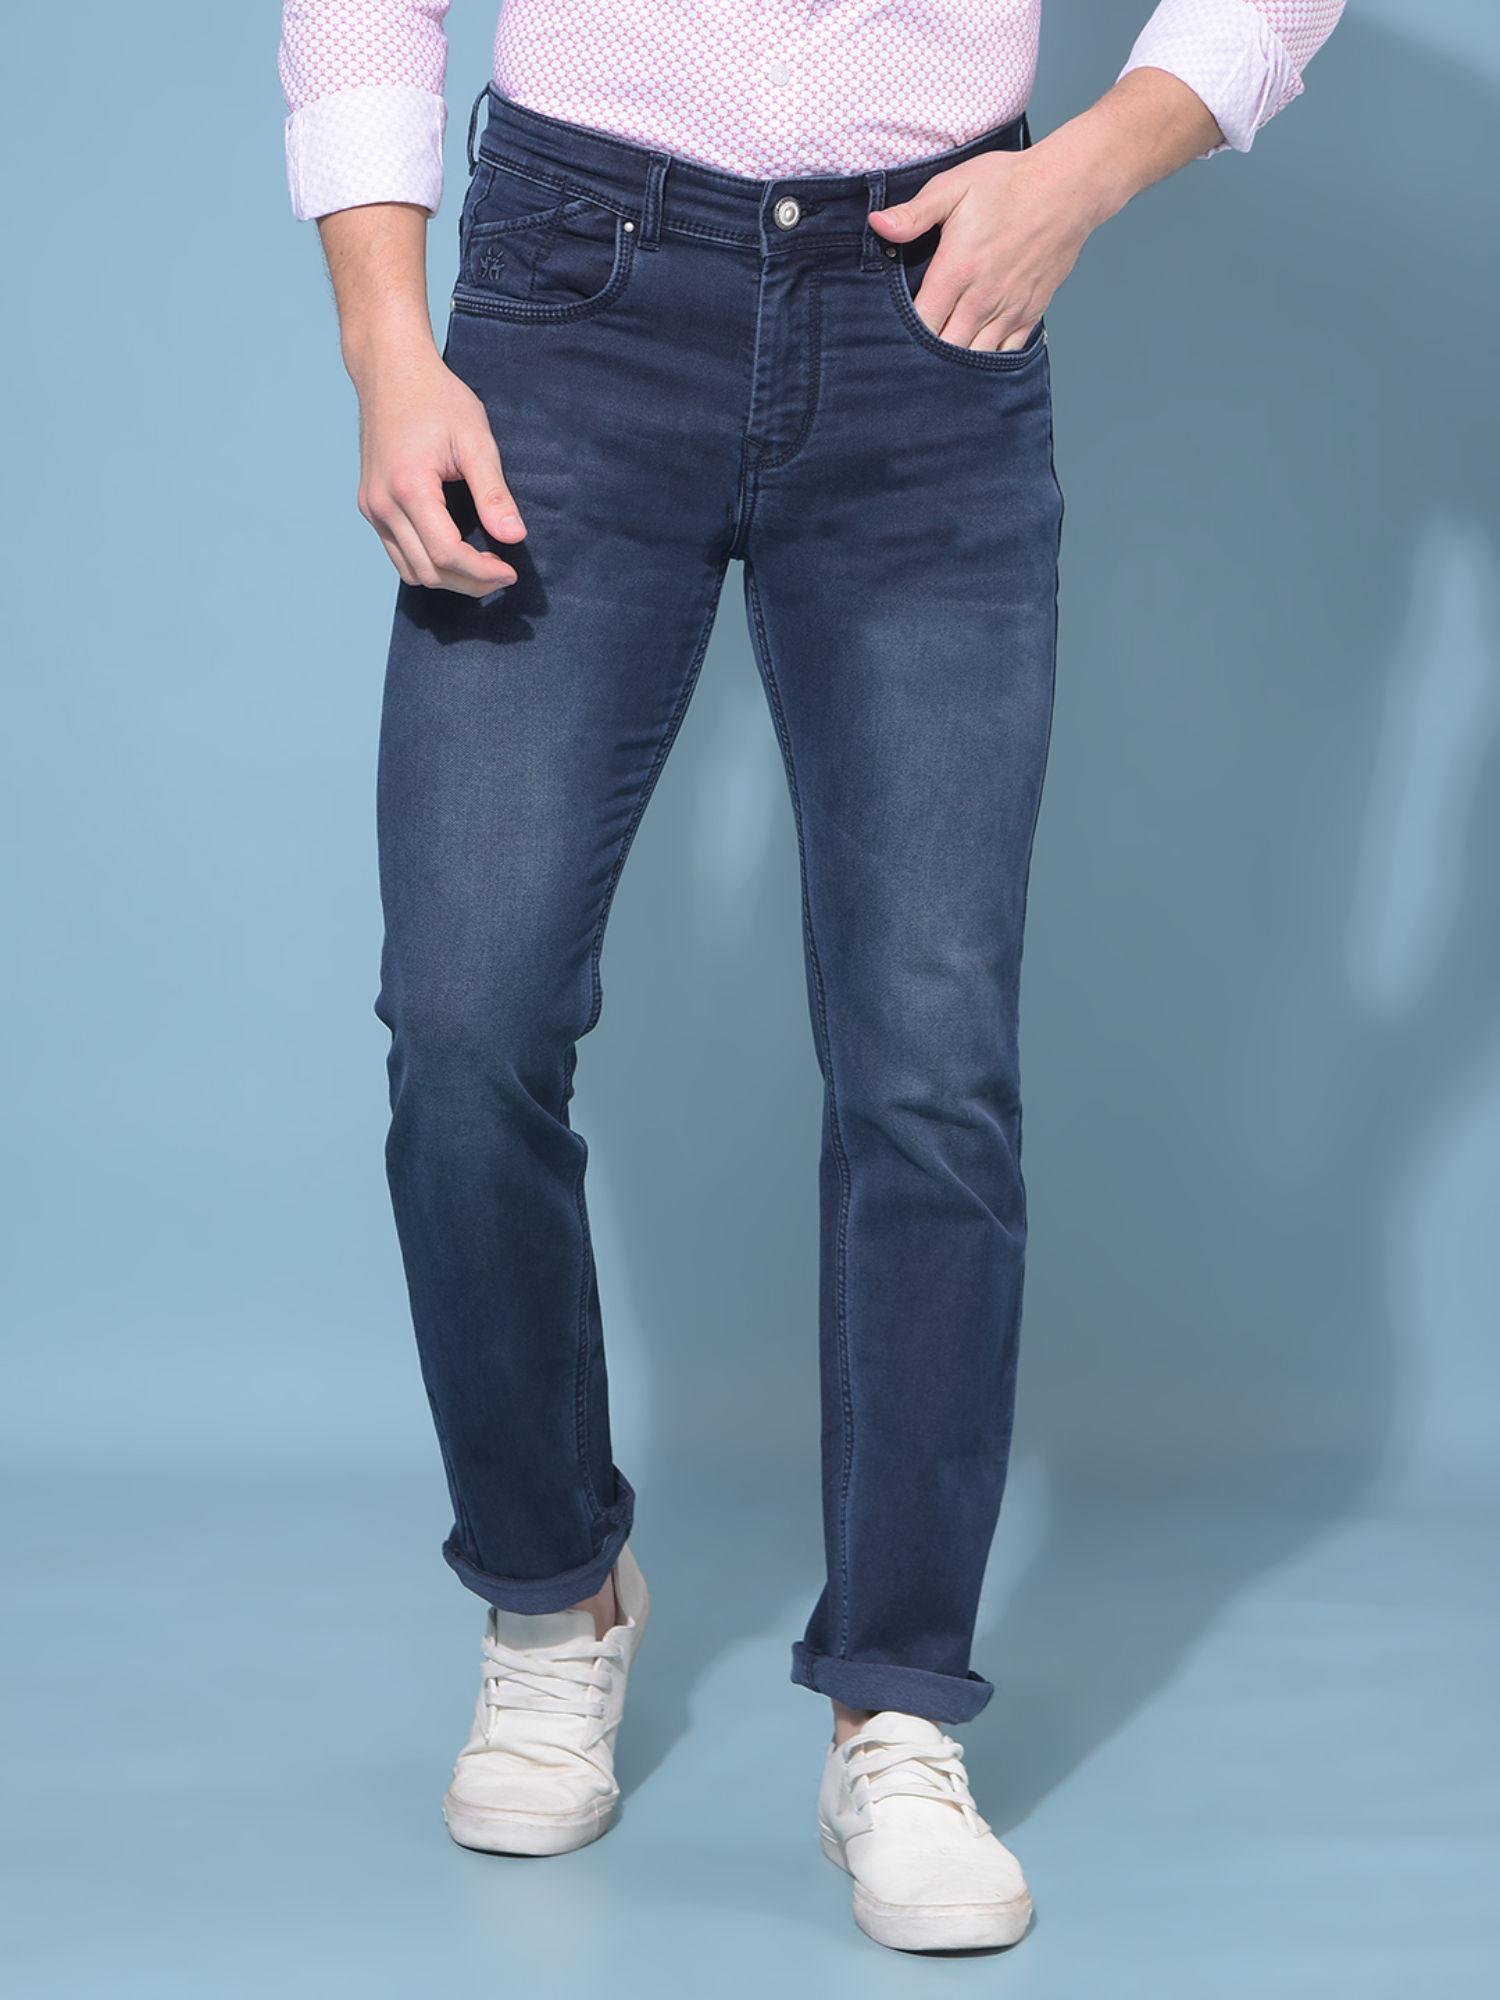 mens-navy-blue-straight-stretchable-jeans